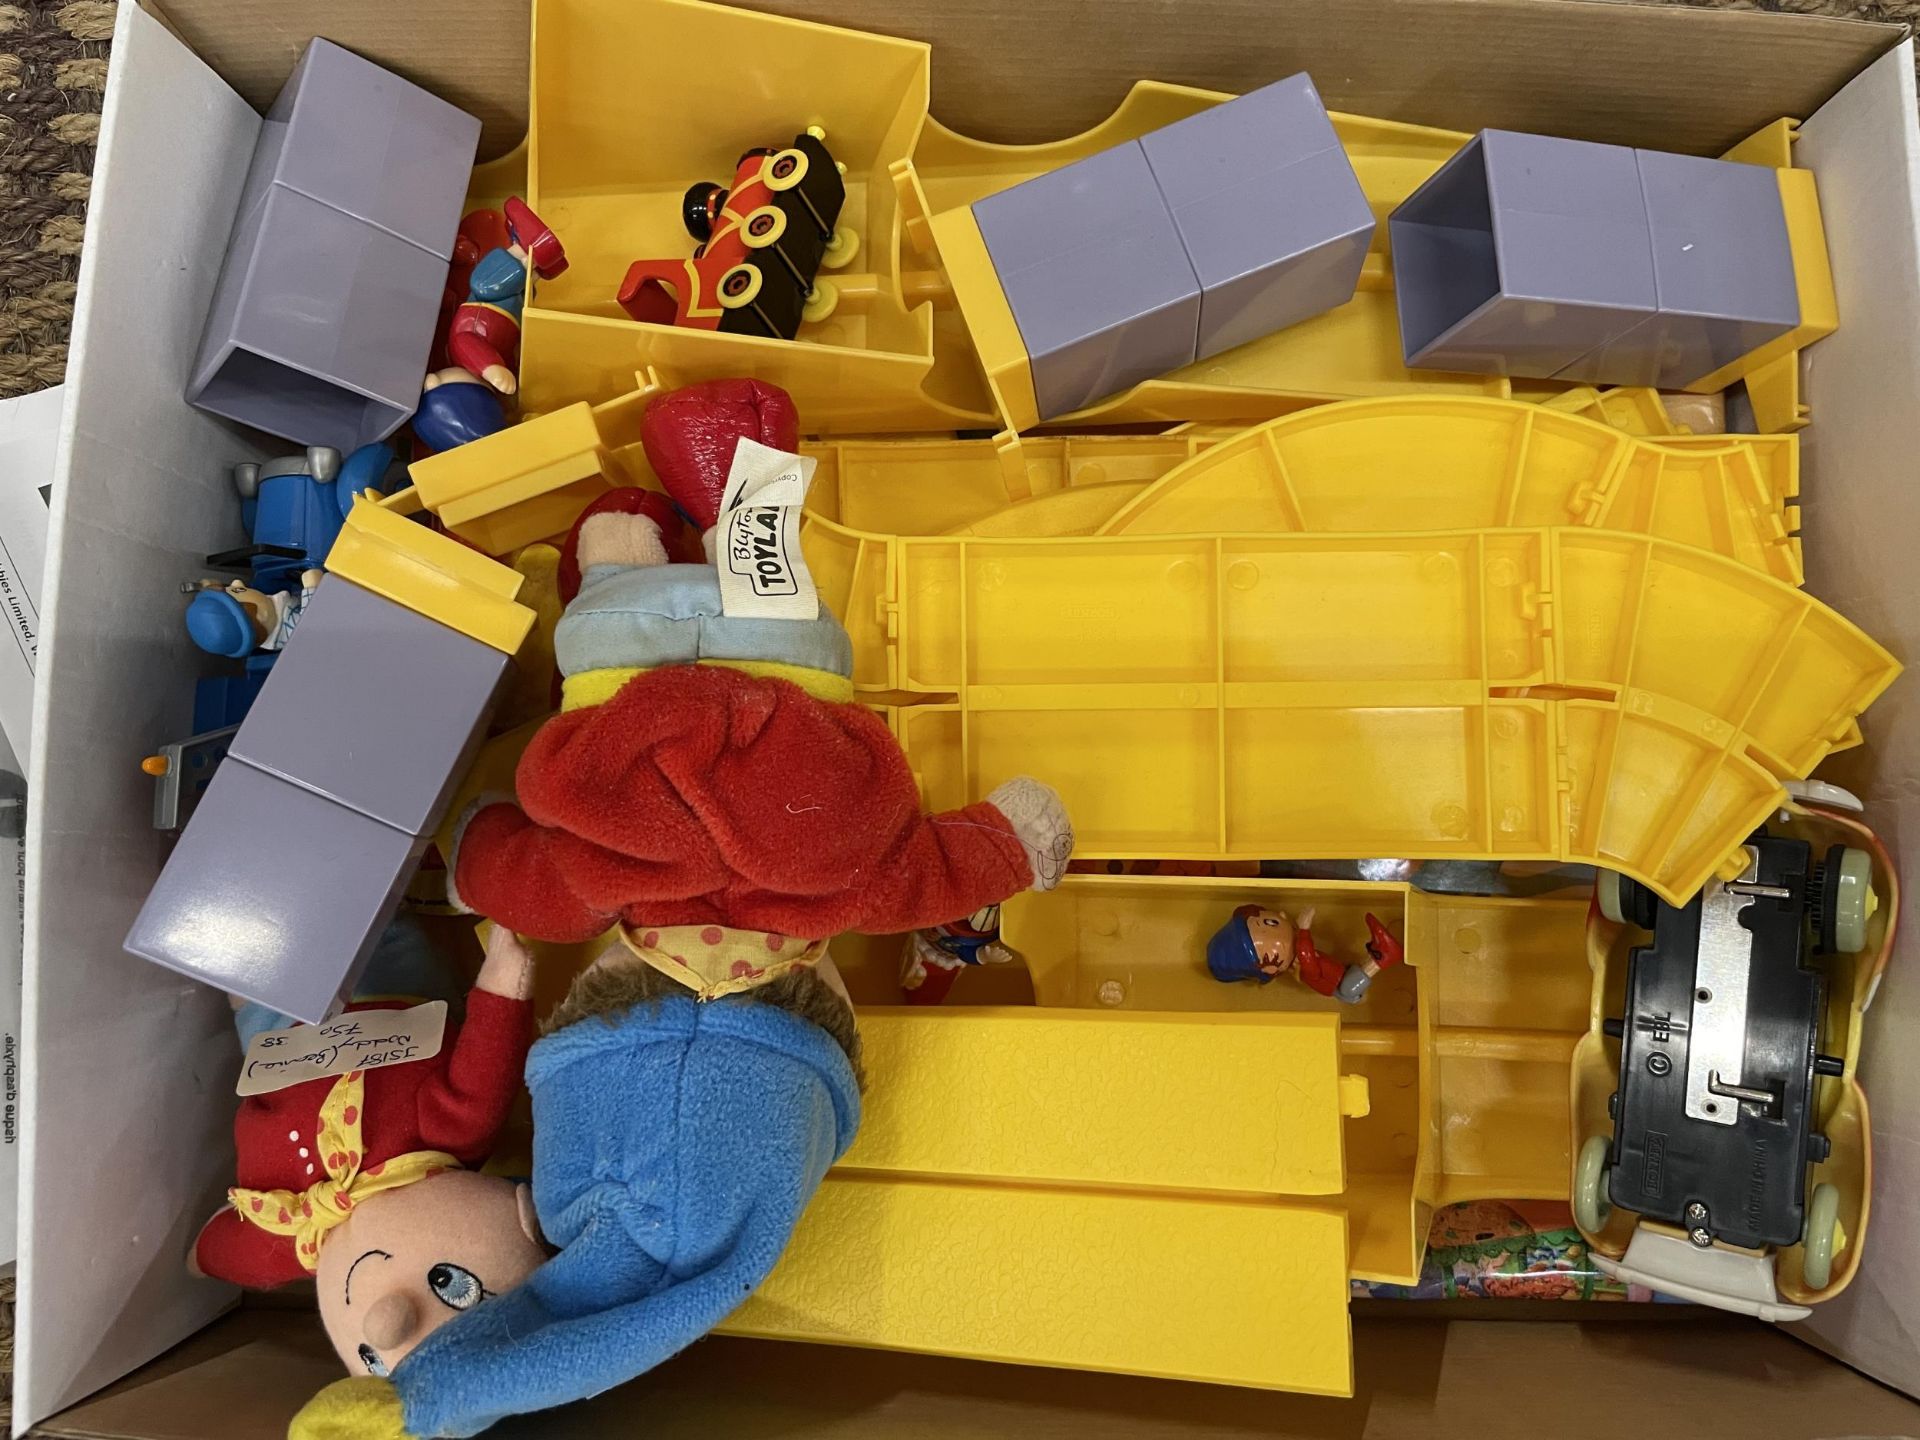 TWO BOXED NODDY ITEMS TO INCLUDE TOYLAND PLAYSET AND A VEHICLE SET WITH FIGURINES - Image 4 of 4